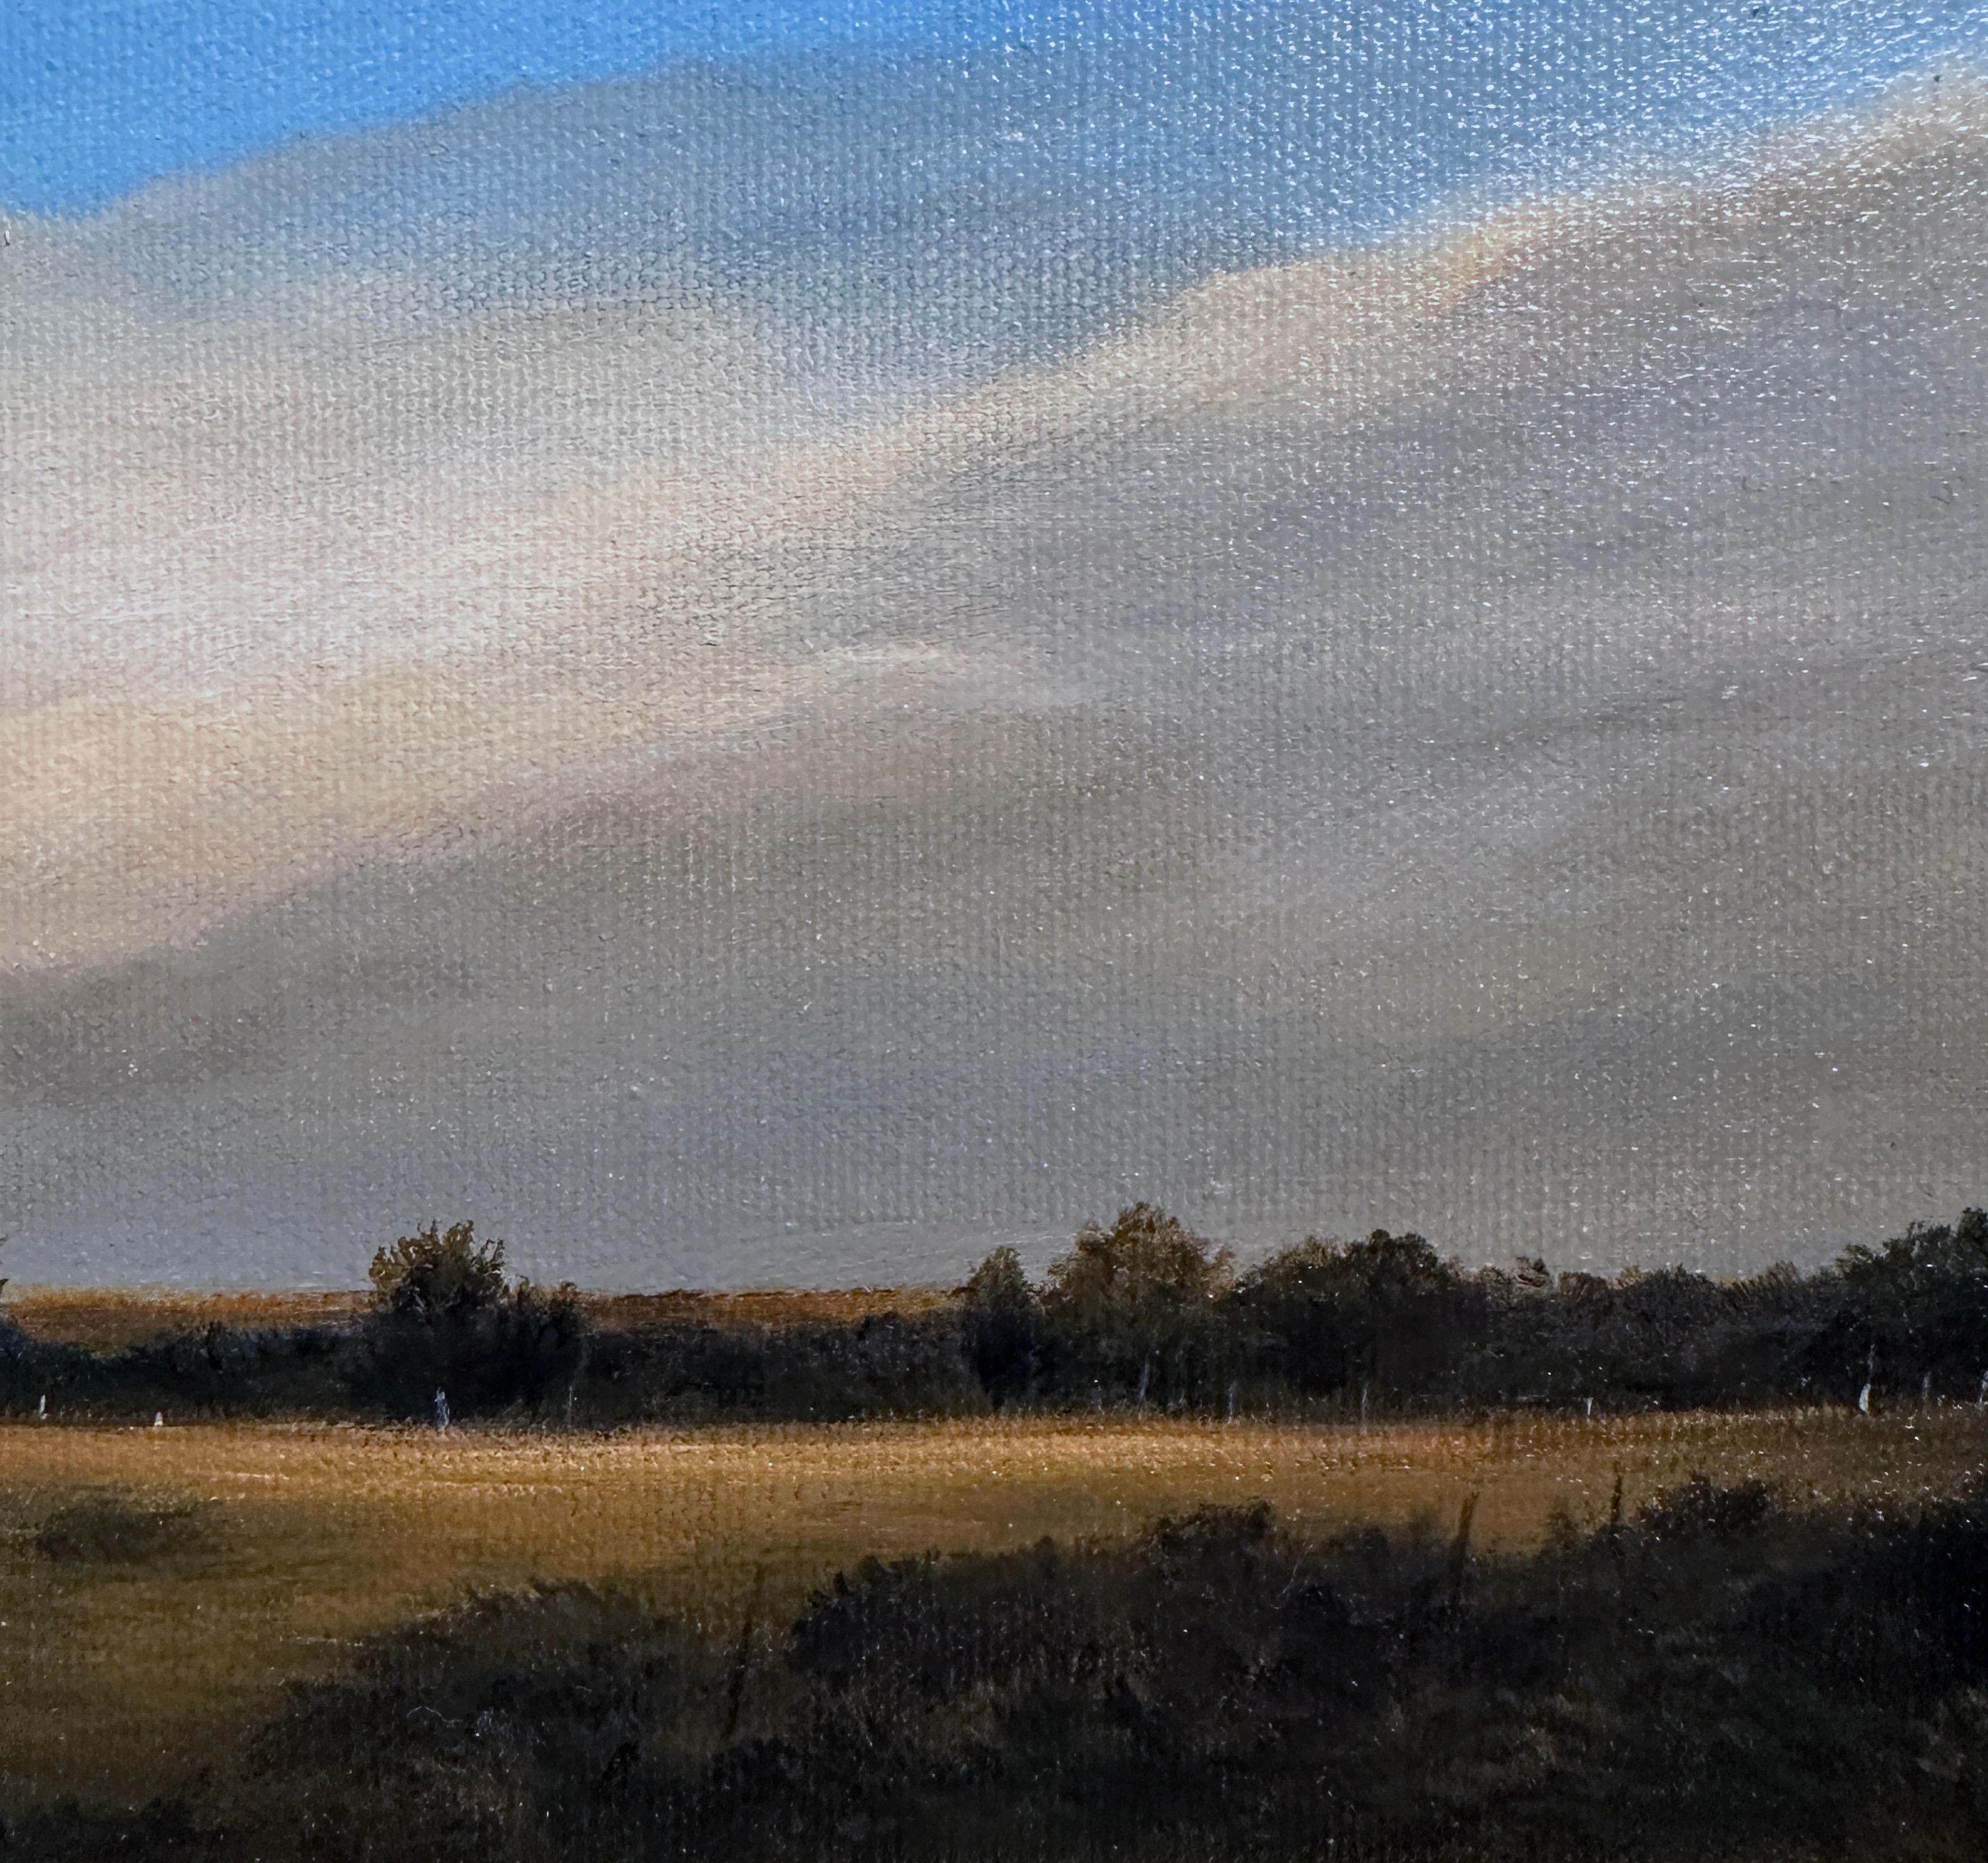 Bright blue sky peaks though hazy clouds in this serene Midwestern landscape as only Ahzad Bogosian can capture.  This tranquil landscape, devoid of any human interaction, captures the complexities and beauty of mother nature.  This small painting